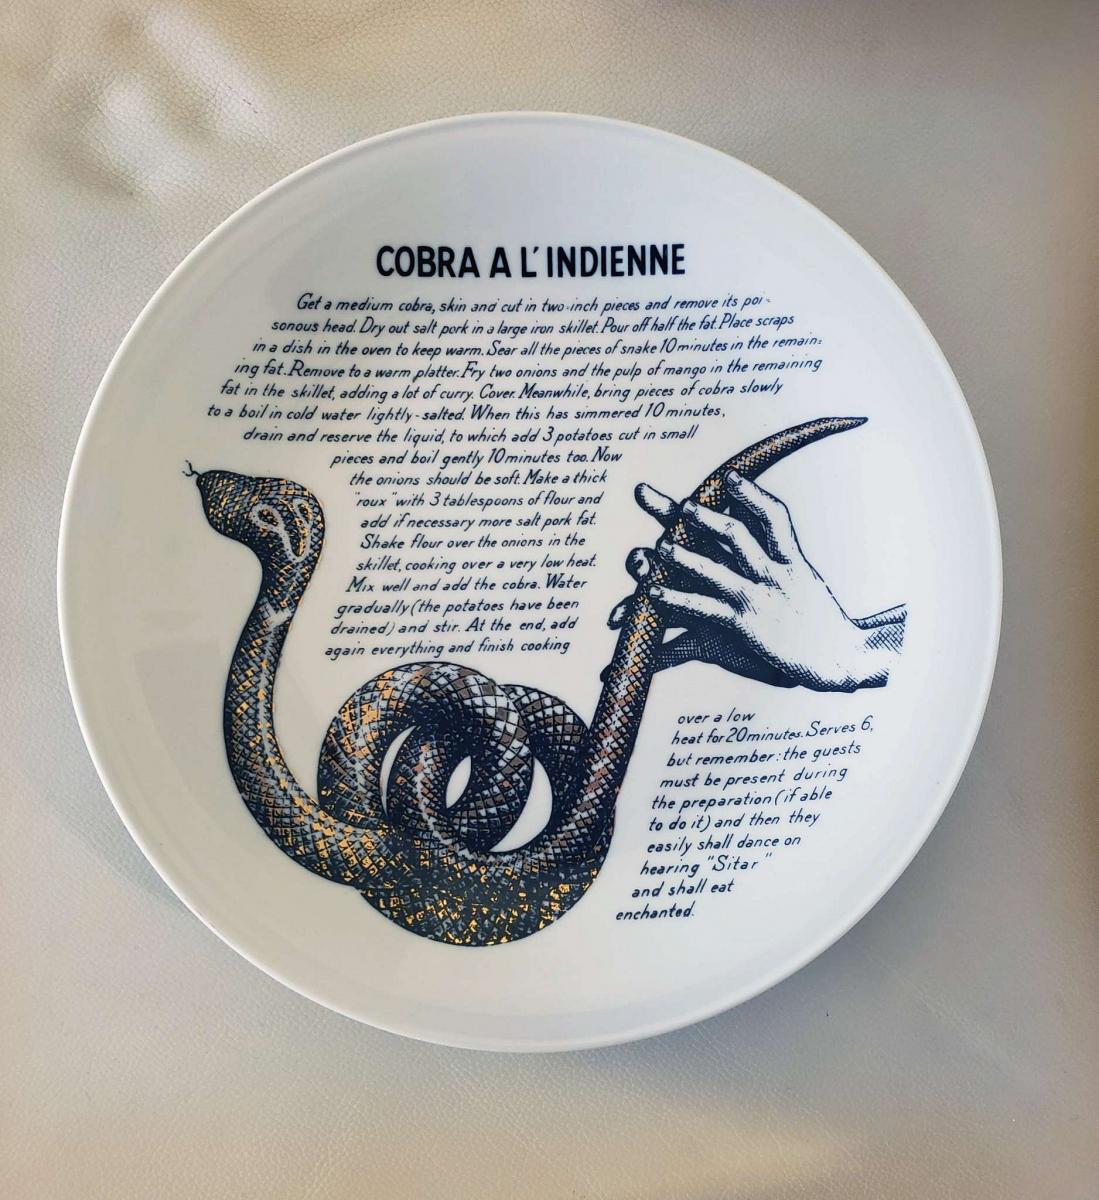 Vintage Piero Fornasetti Recipe Plate, Cobra A L'Indienne, Made for Fleming Joffe, Silkscreen & Transfer on Porcelain, 1960s